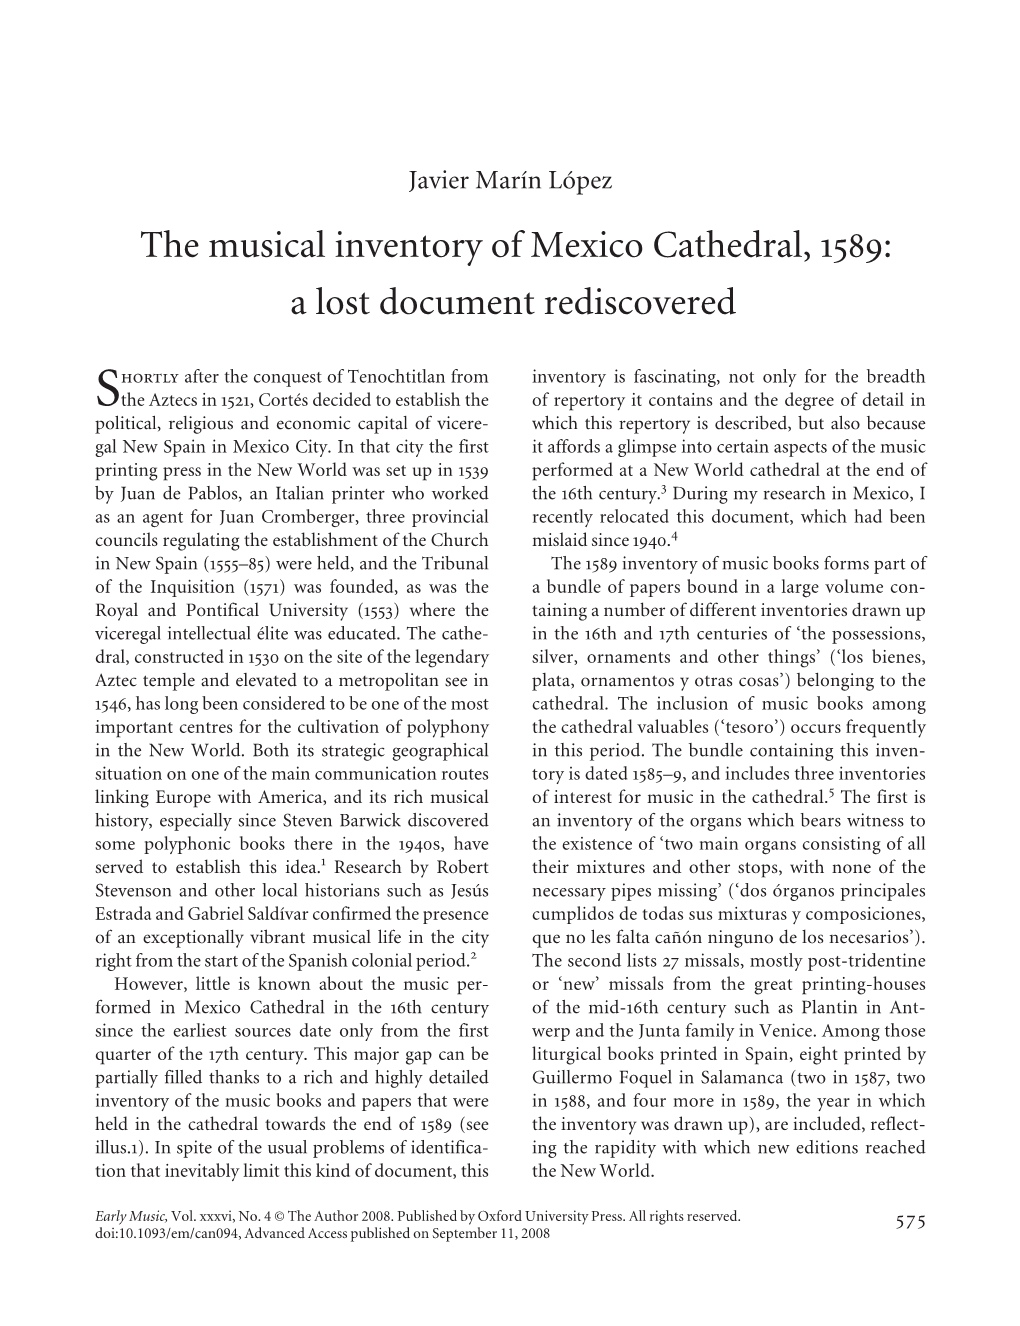 The Musical Inventory of Mexico Cathedral, 1589: a Lost Document Rediscovered